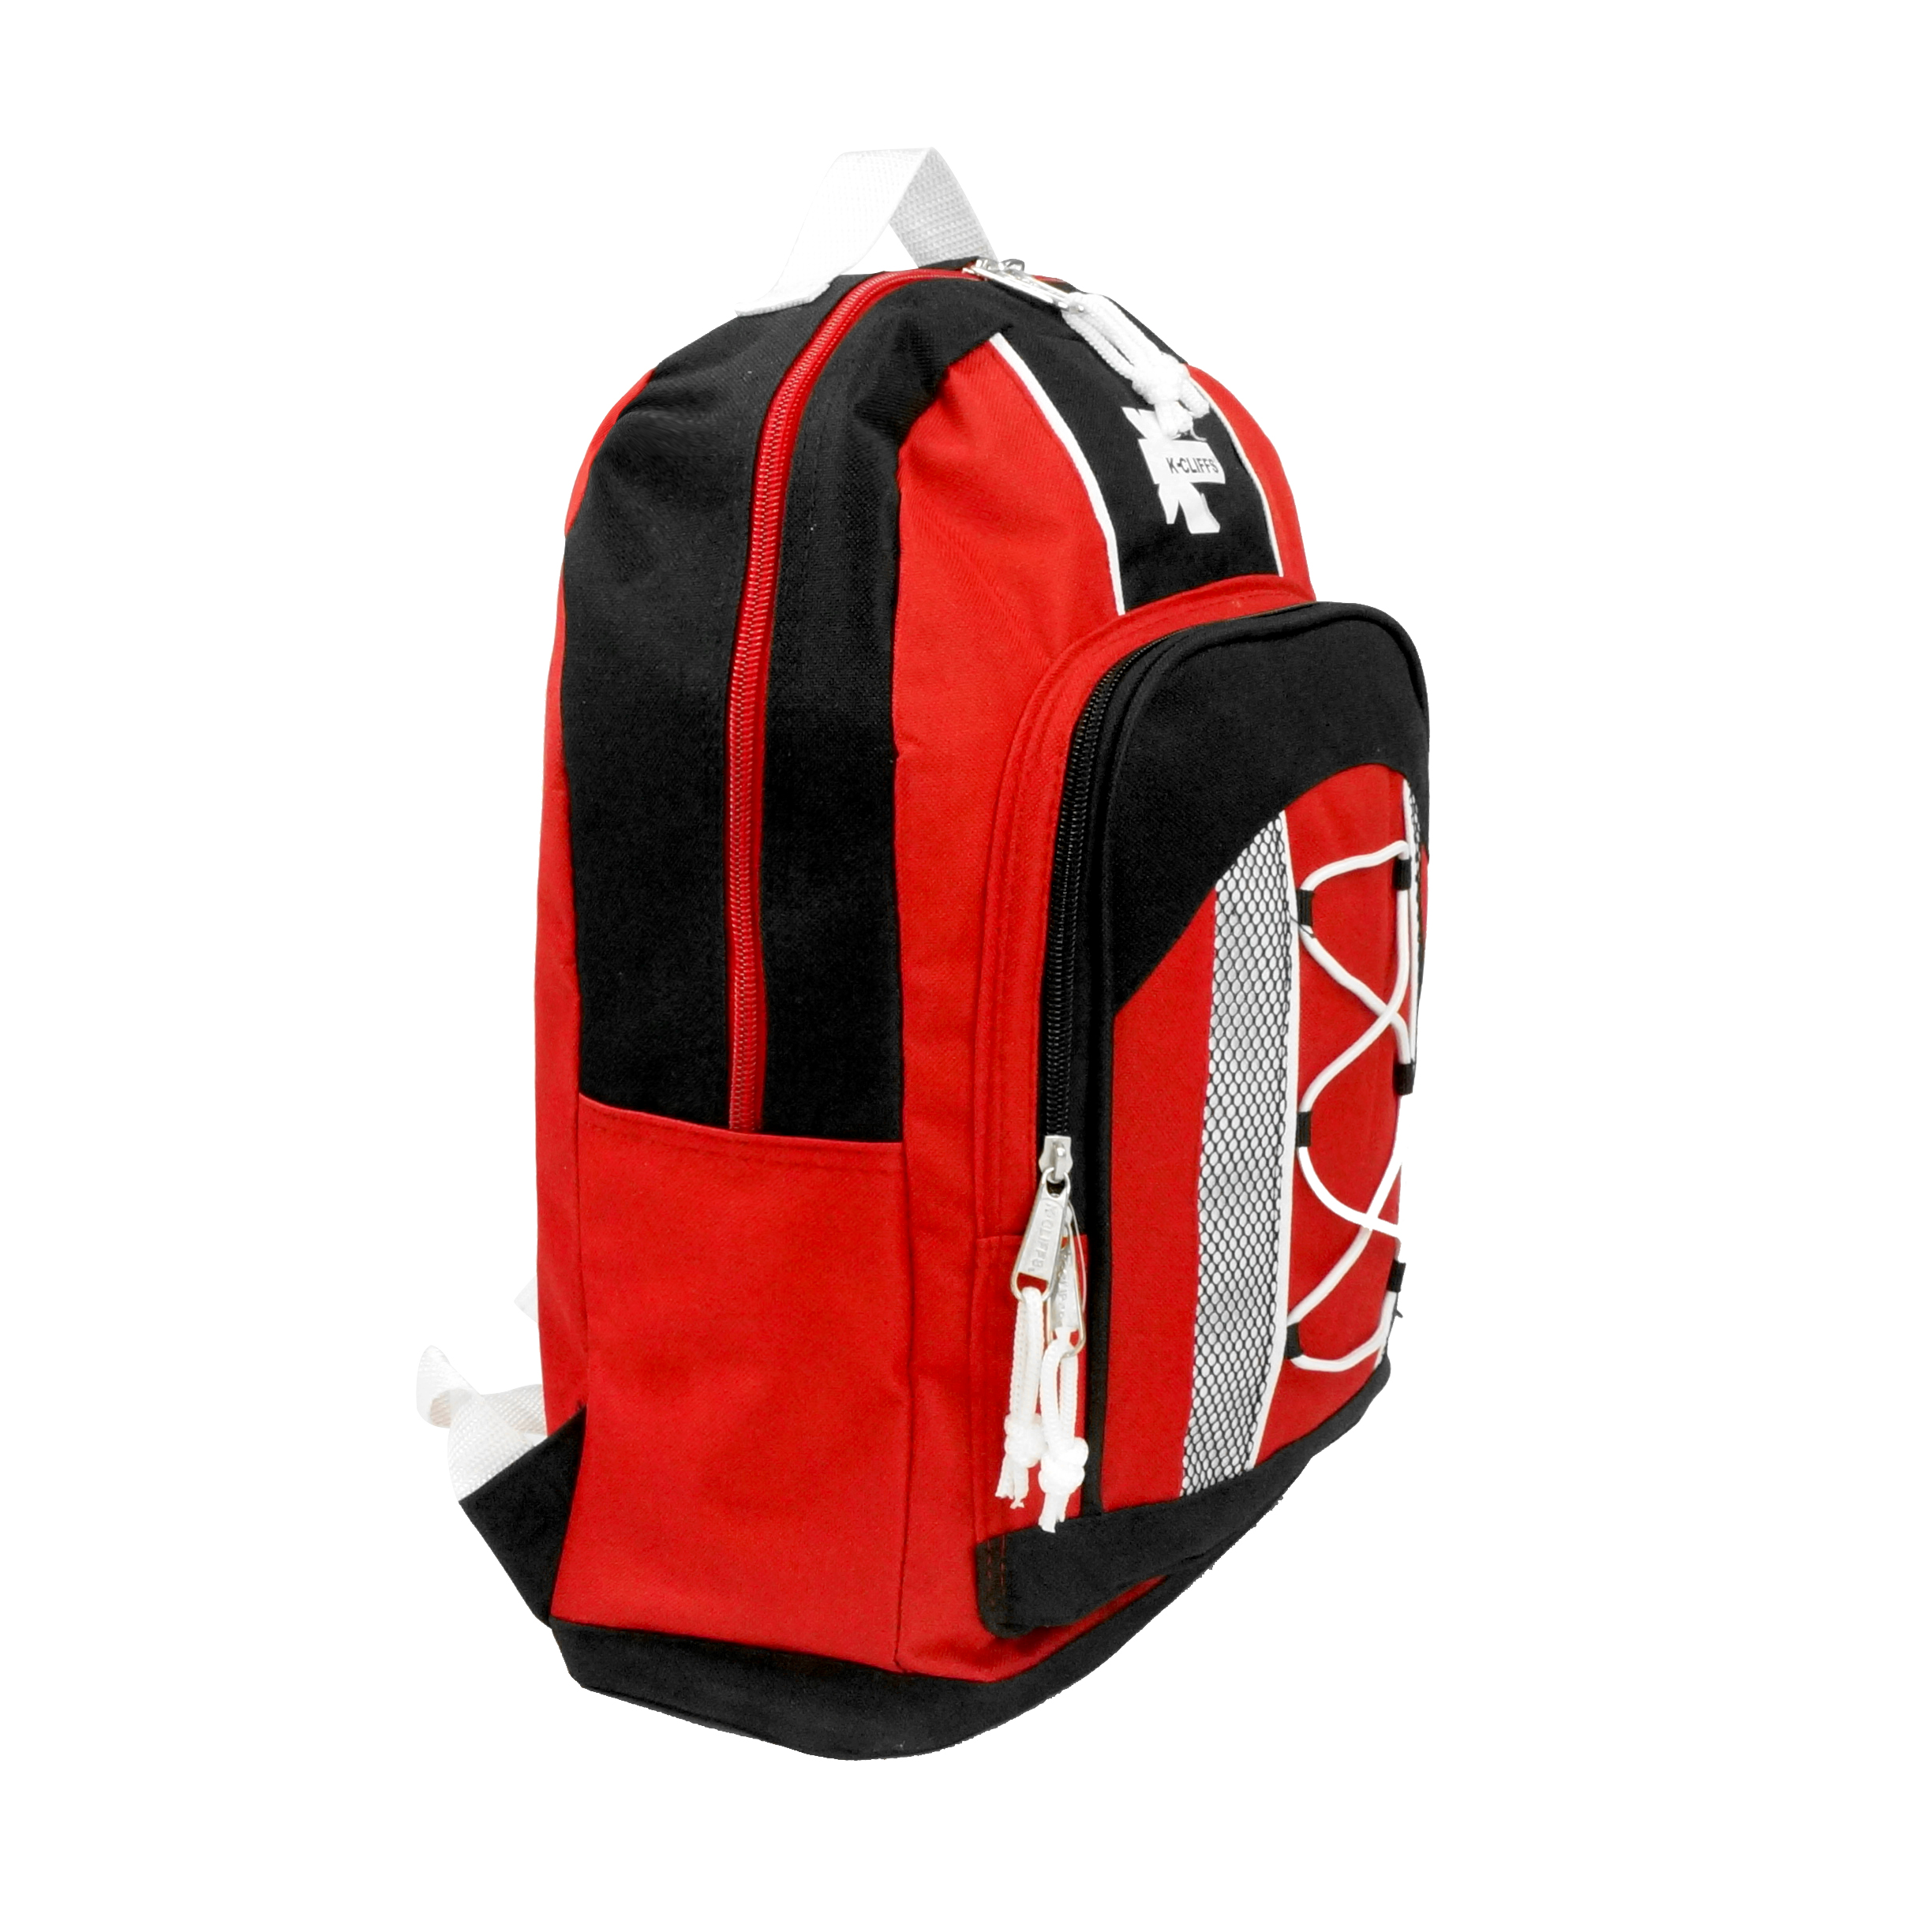 K-Cliffs 15” Lightweight School Backpack Daypack Bungee Bookbag Travel Unisex Kids- Adults Red, Polyester - image 4 of 6